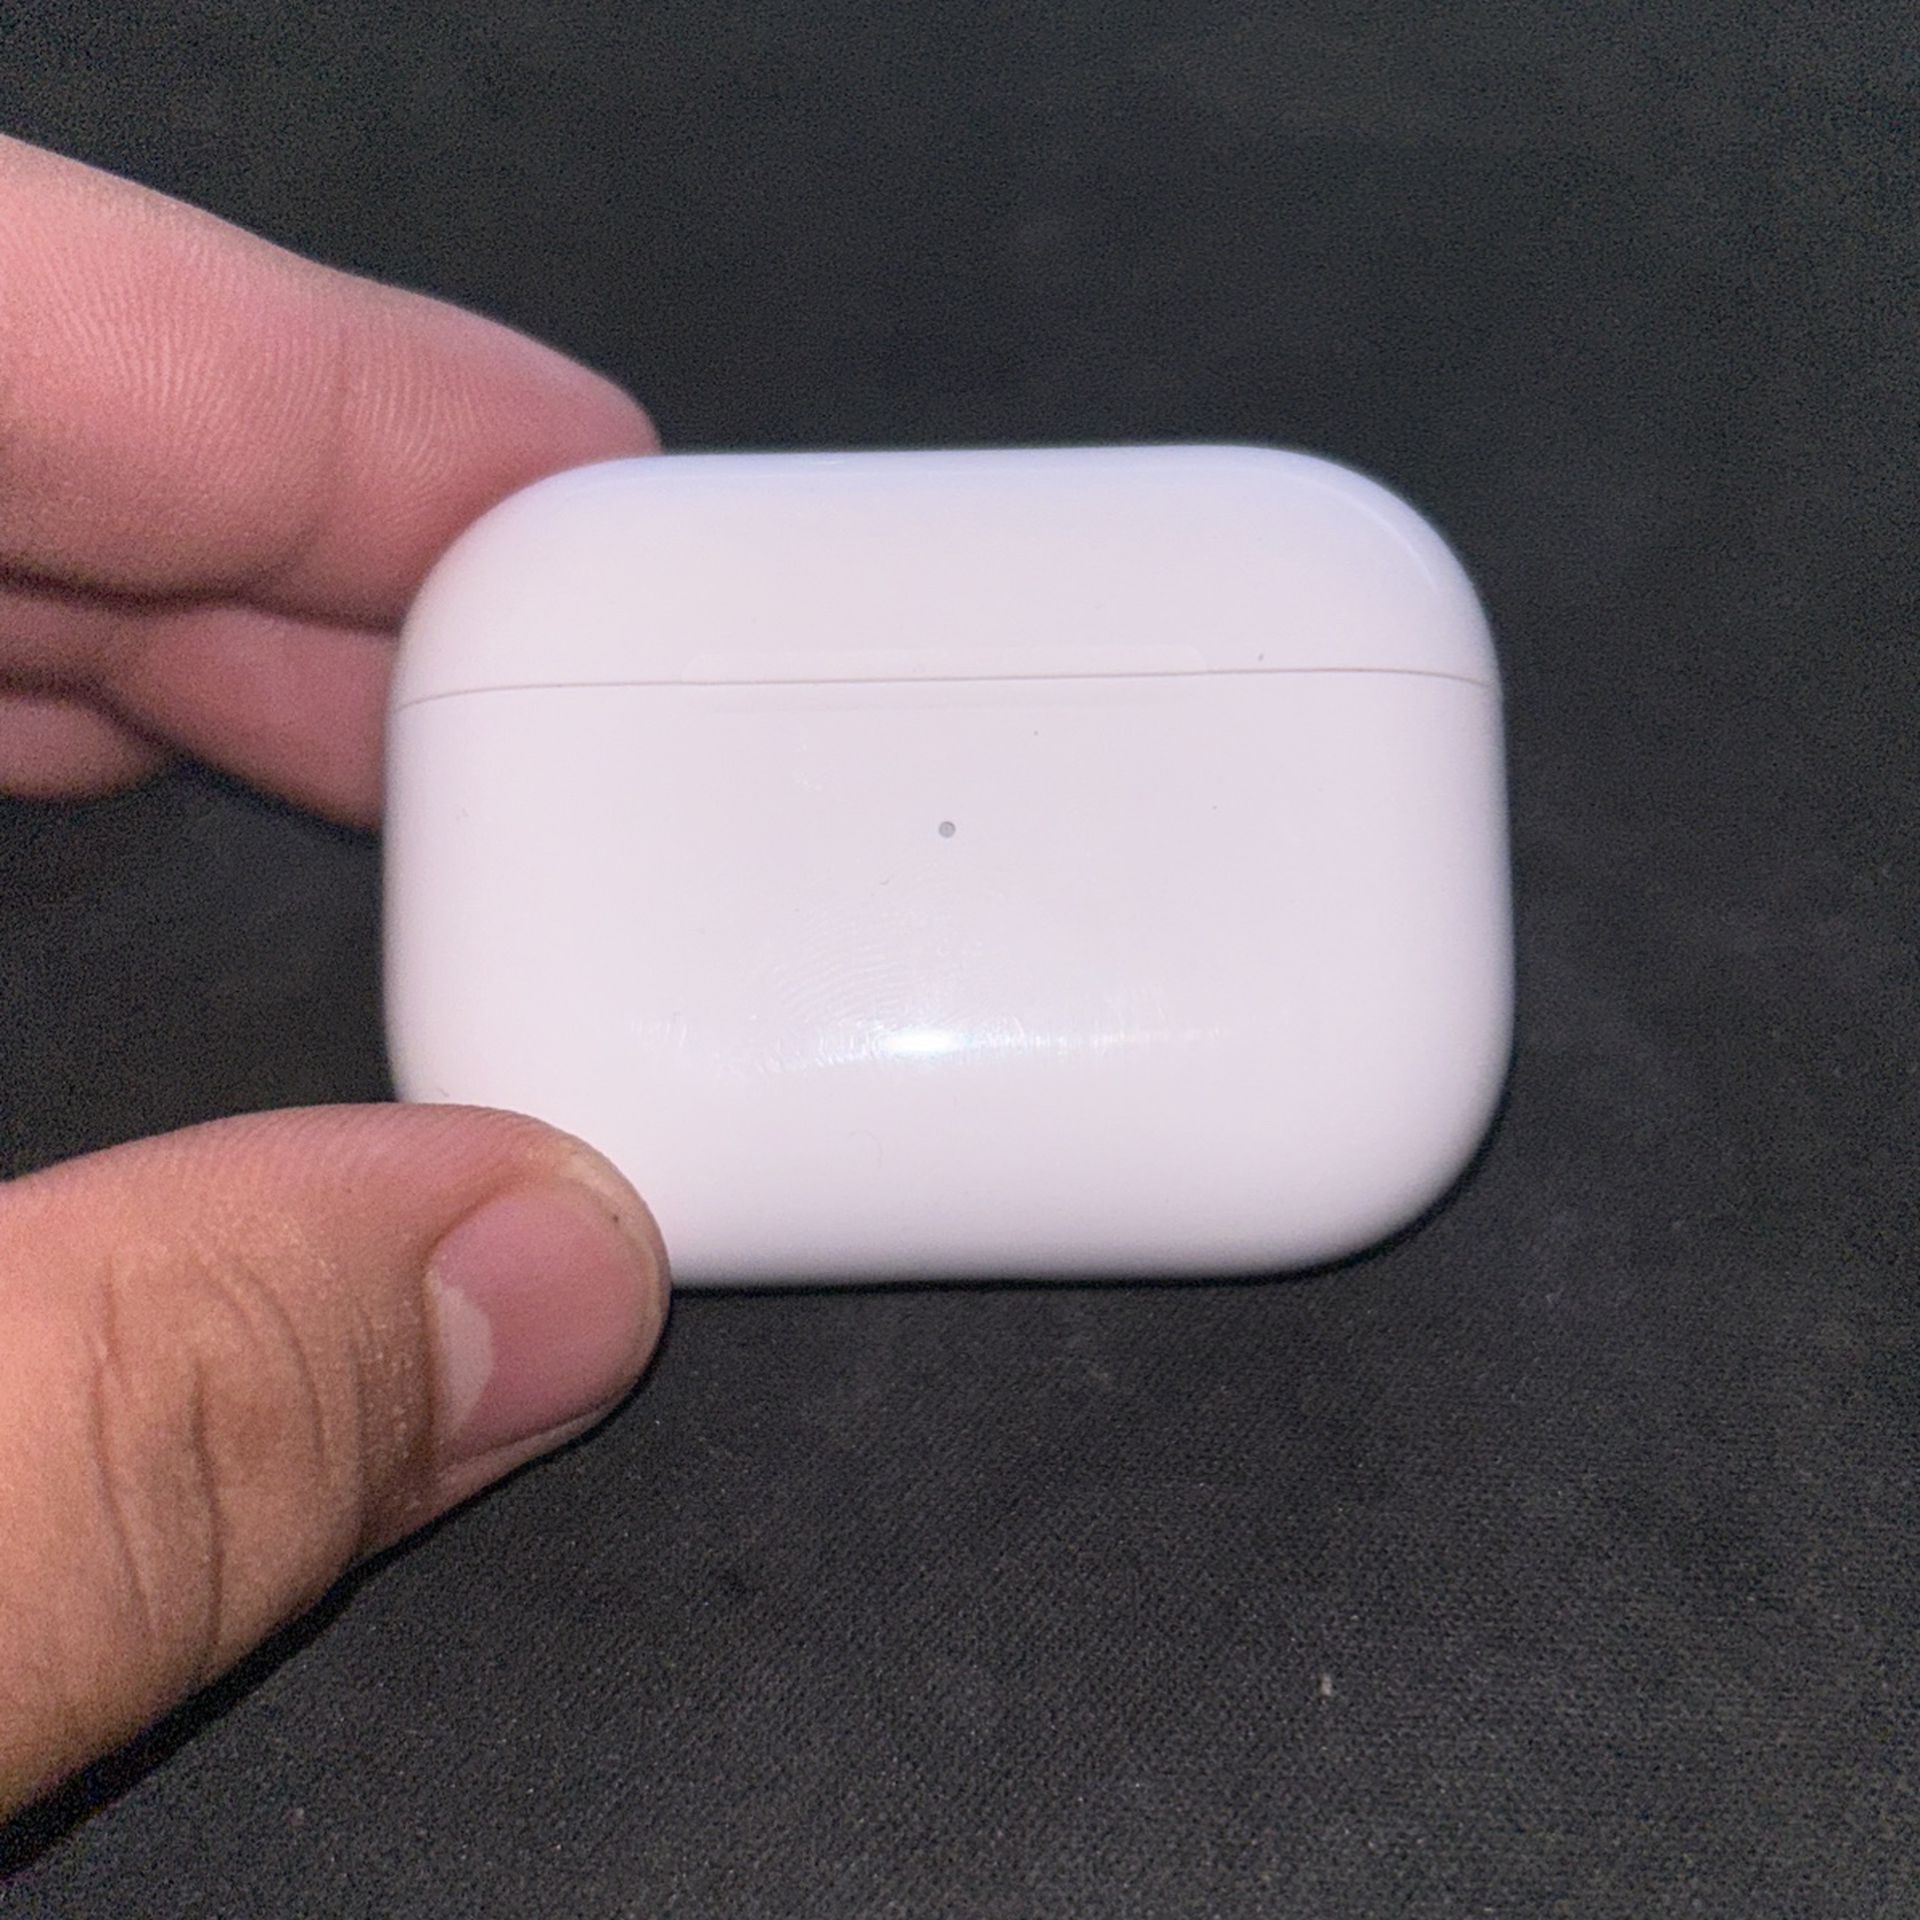 AirPods Pro’s Second Gen